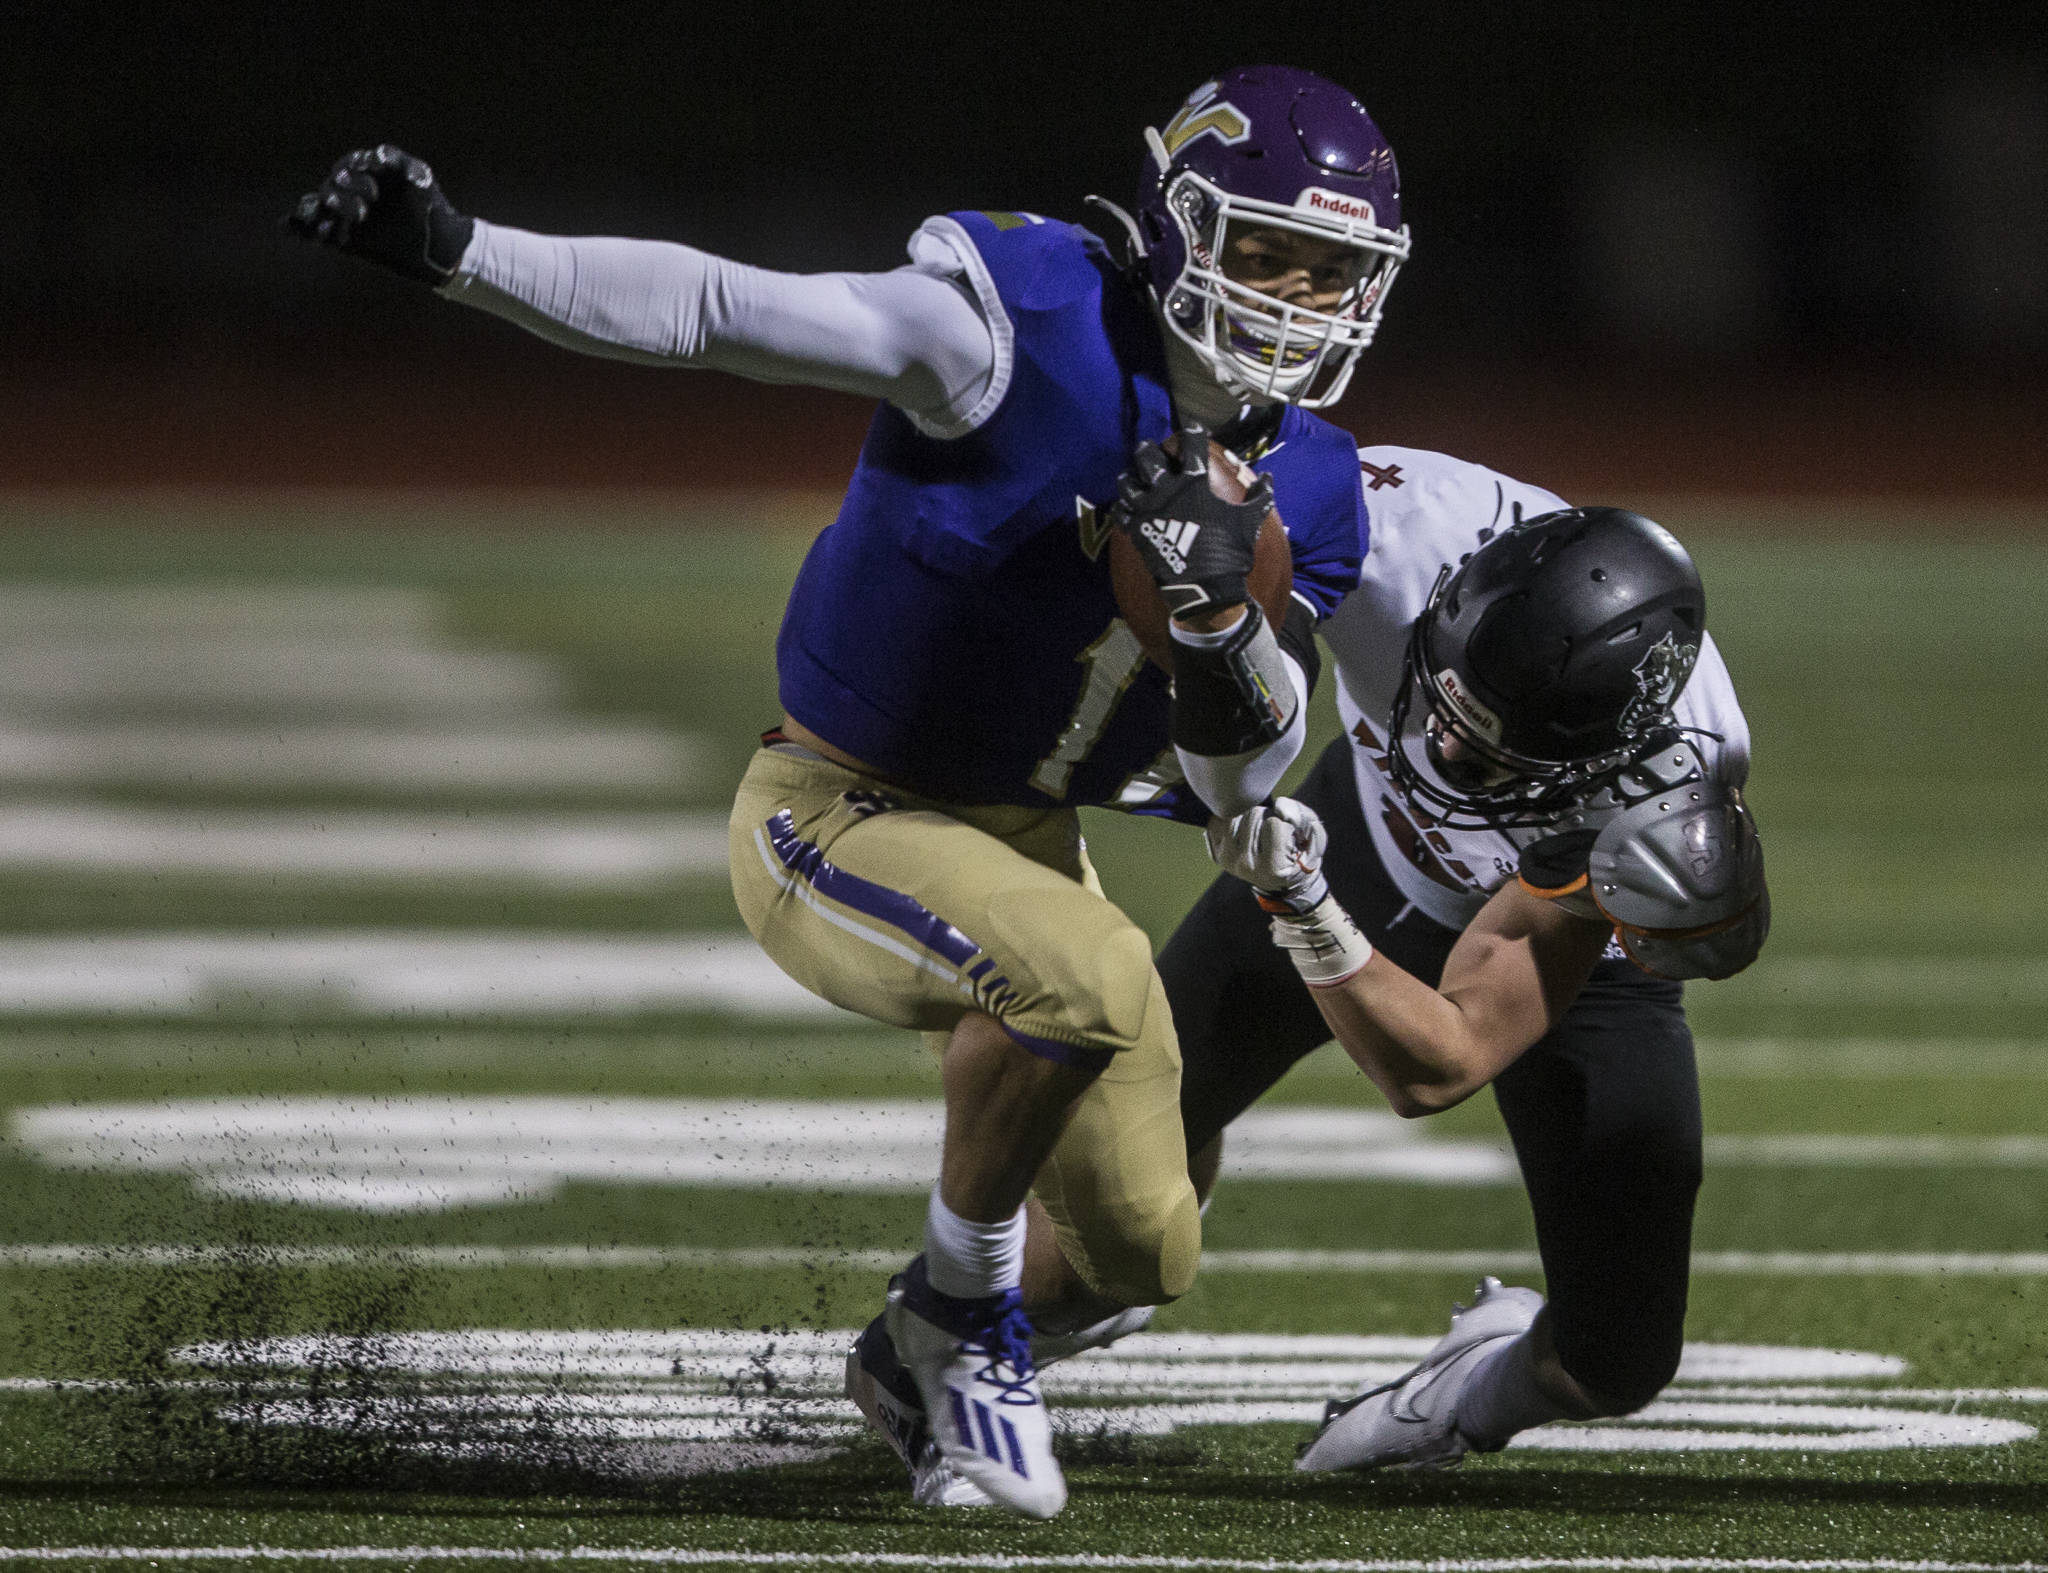 Lake Stevens’ Jayden Limar runs through a tackle during the Vikings’ 26-7 win over Archbishop Murphy on Saturday night in a season-opening showdown of perennial Snohomish County prep football powers. (Olivia Vanni / The Herald)